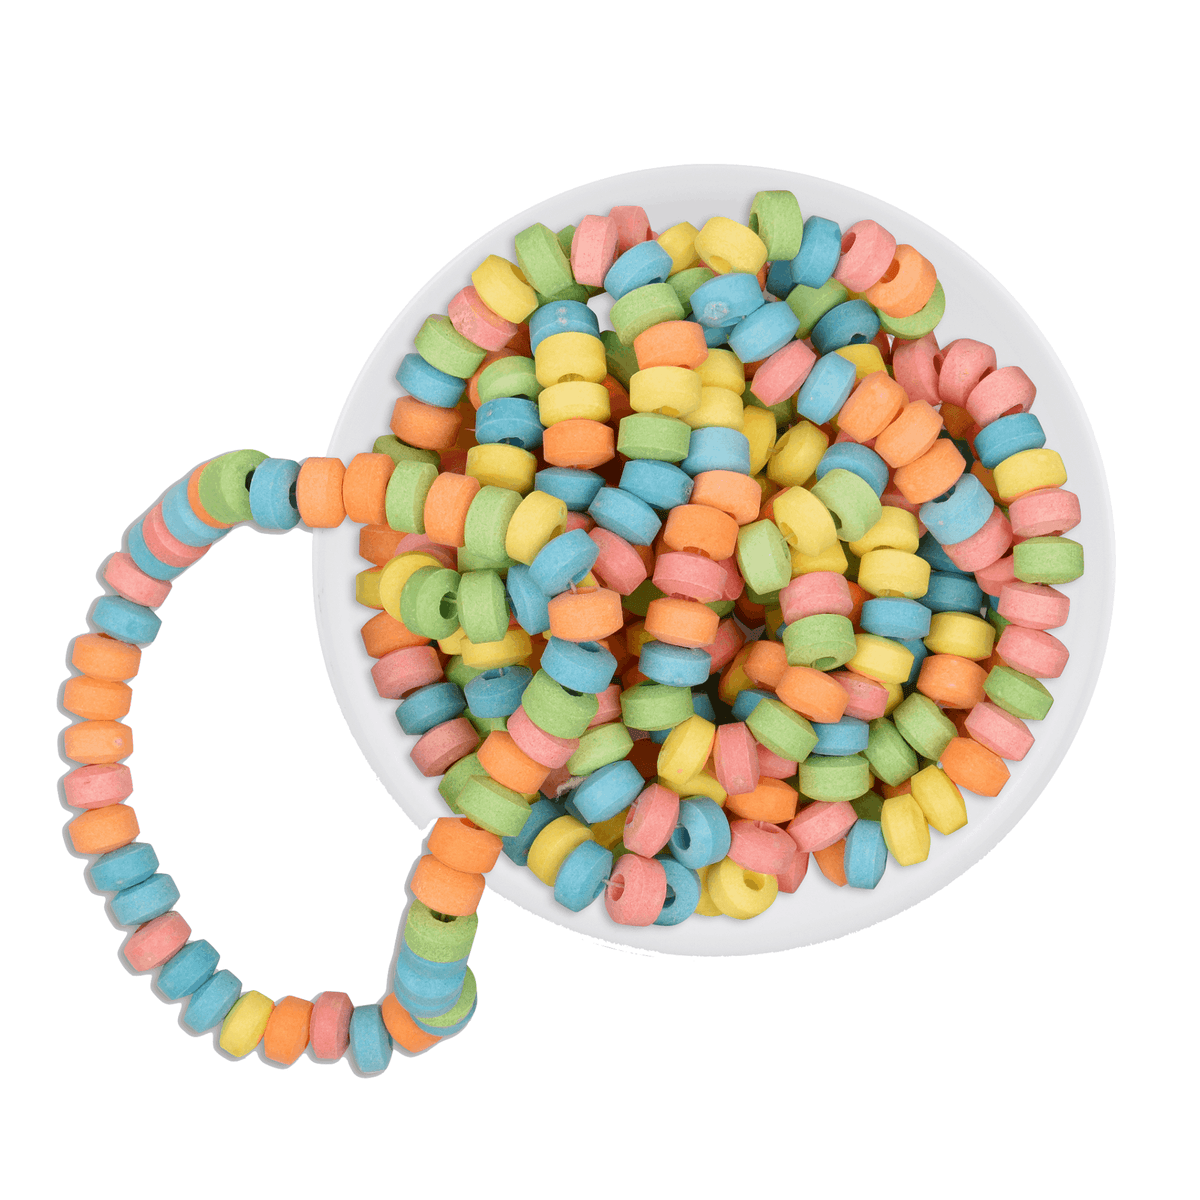 Candy Necklaces Bulk - 100 Count - Candy Favorites